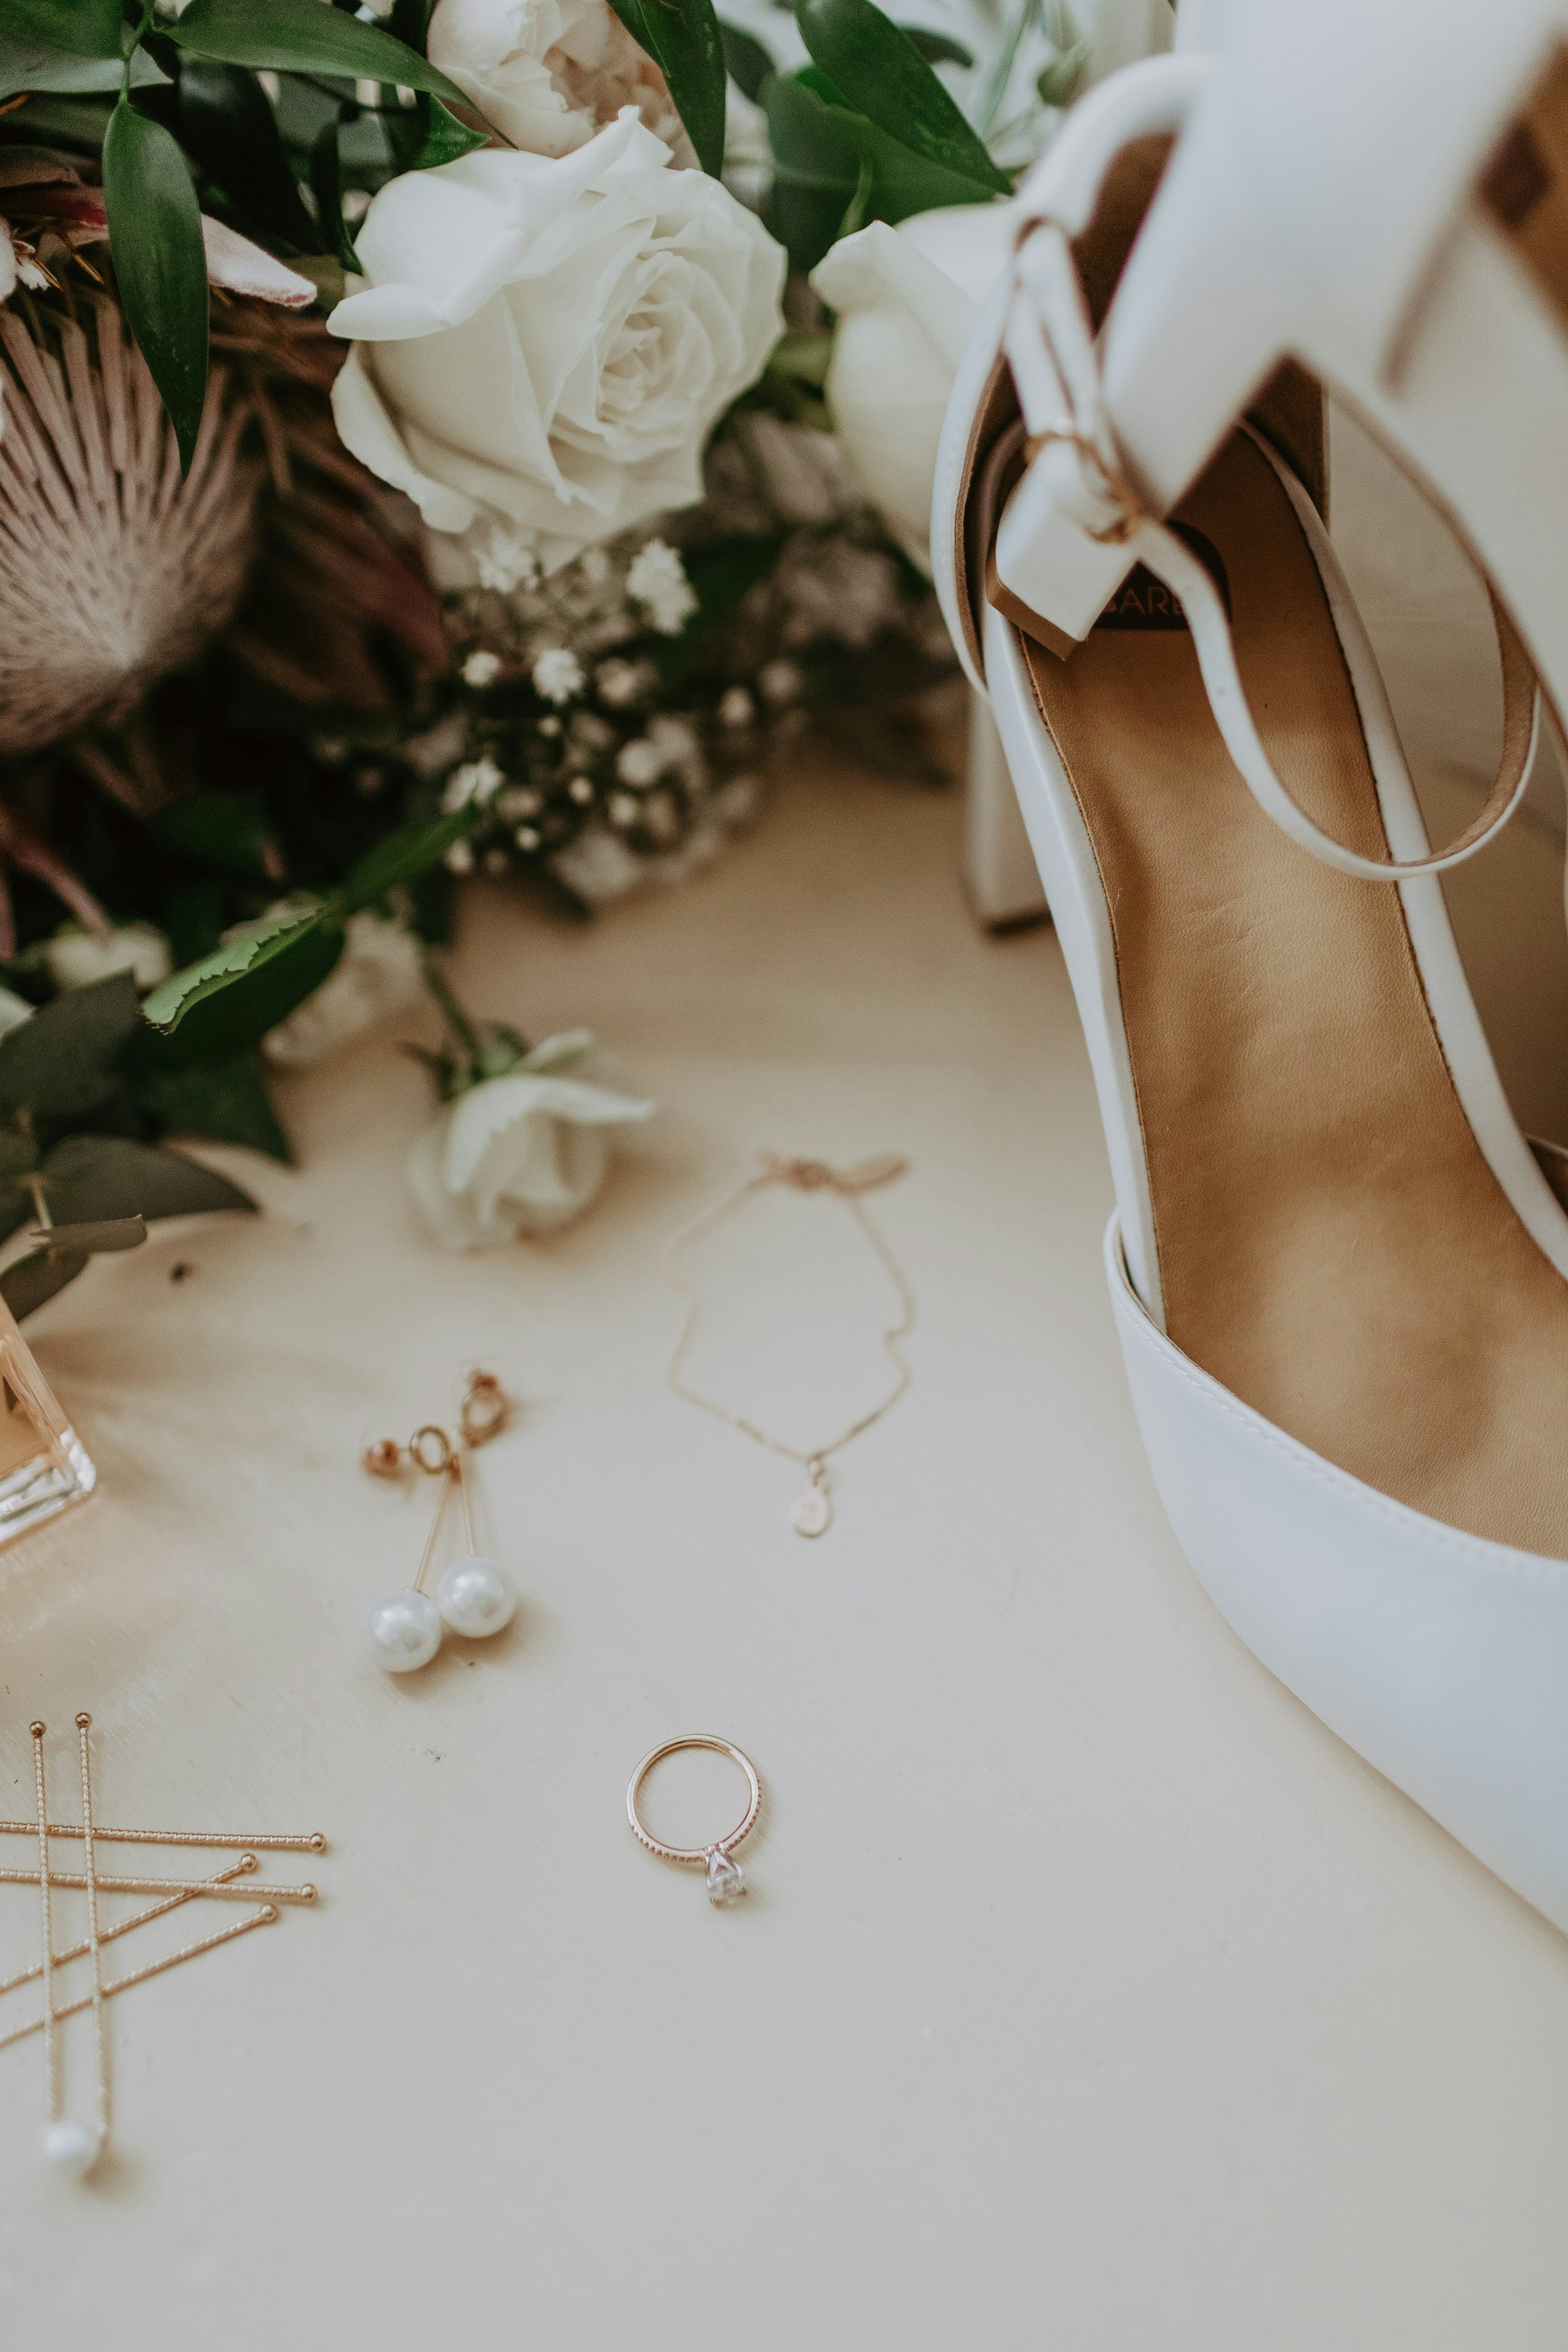 Brides shoes and earrings 